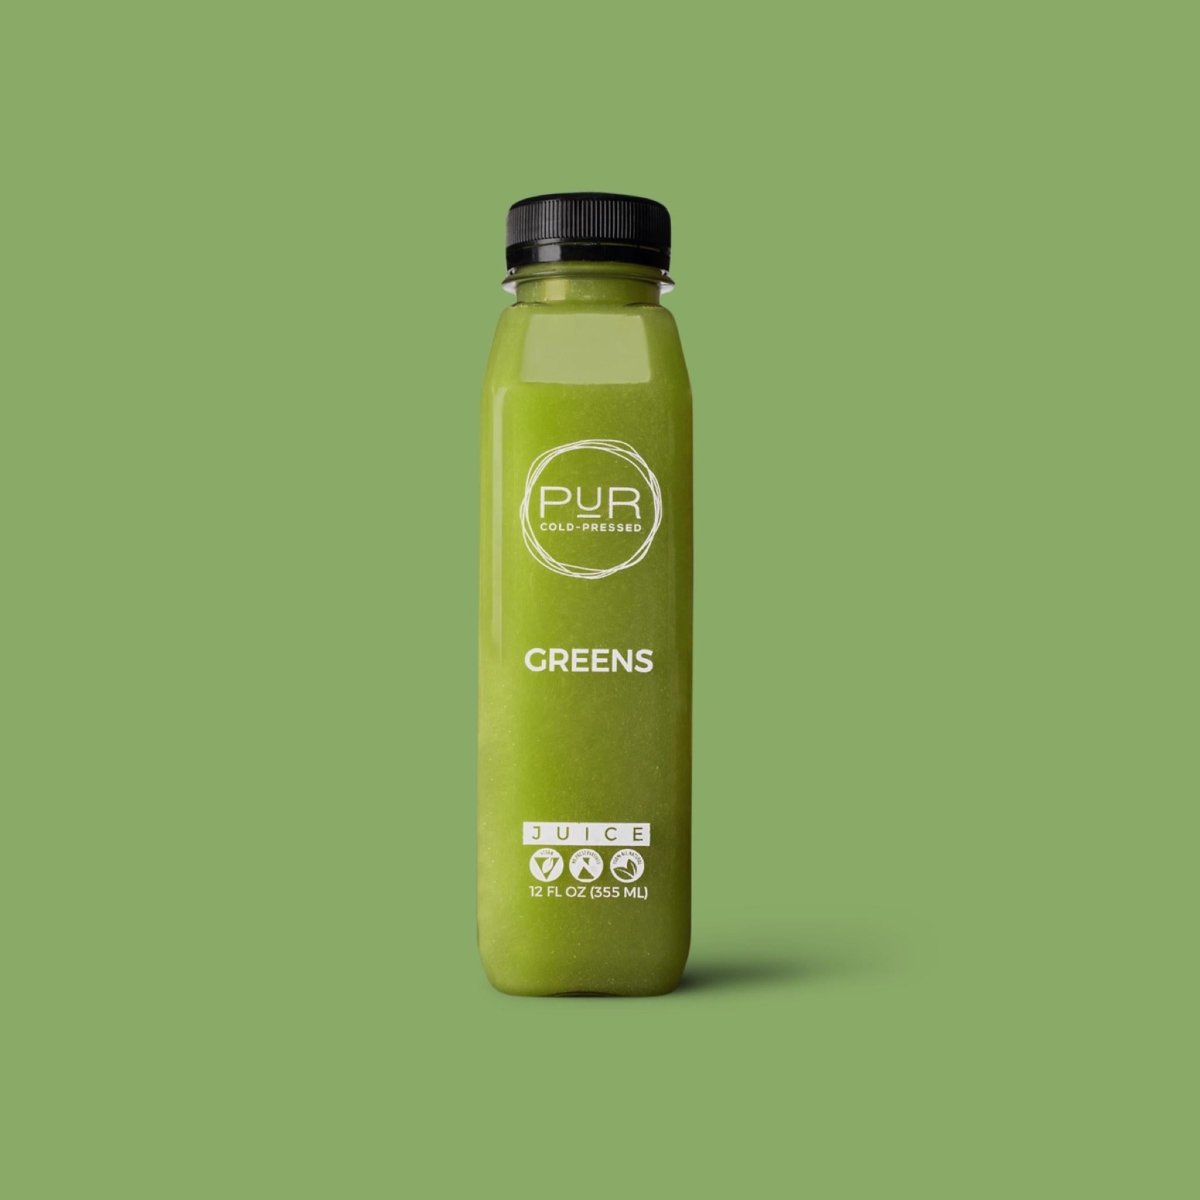 JUICE CLEANSE DISCOVERY - TRY ALL THE CLEANSE FLAVORS - PUR Cold Pressed Juice